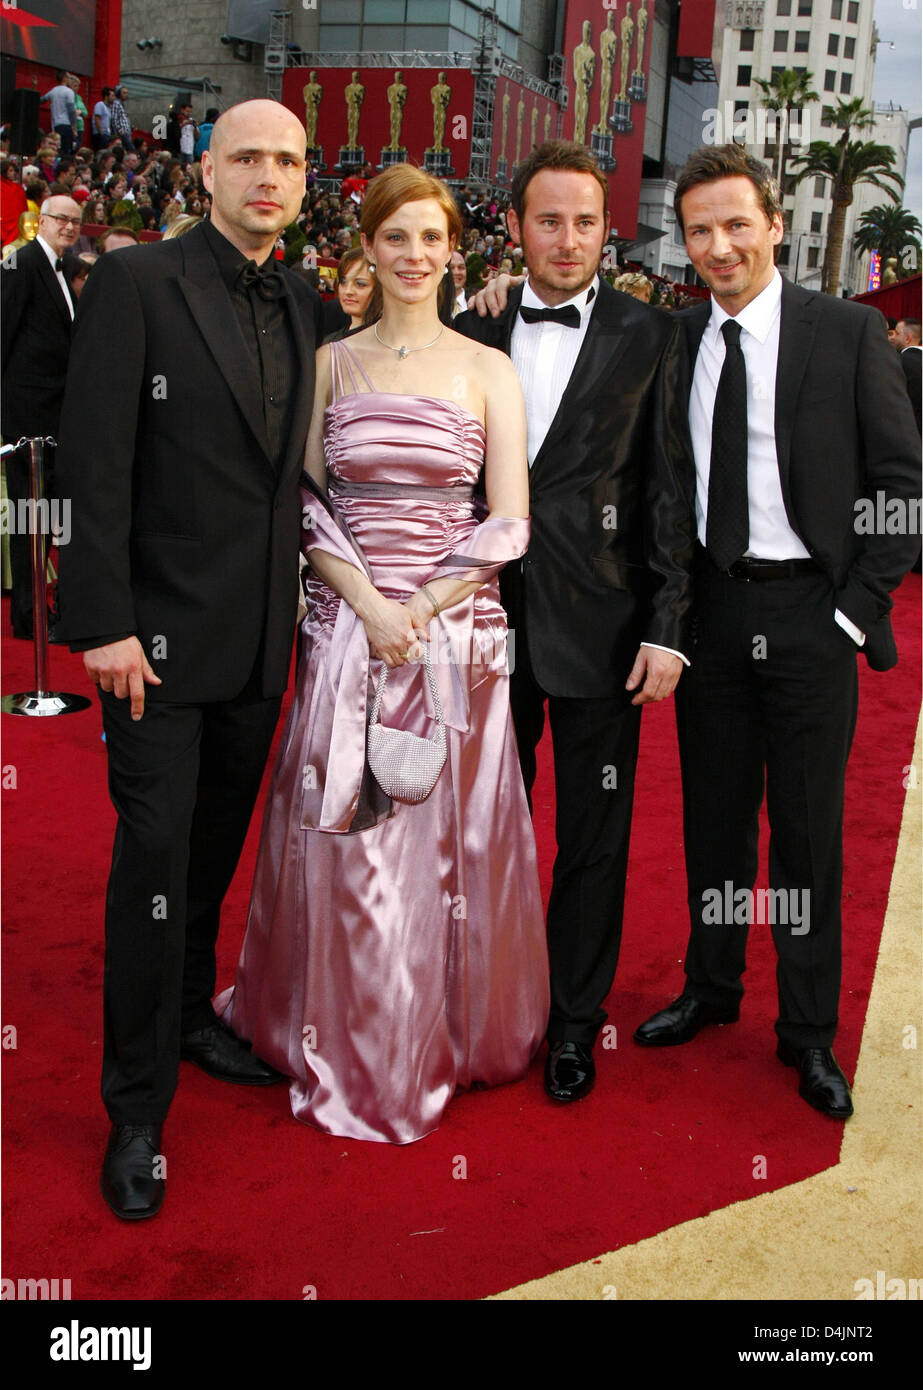 German director Jochen Alexander Freydank (L-R), actress Julia Jäger, co-author Johann A. Bunners and David C. Bunners, producer and actor arrive on the red carpet for the 81st Academy Awards at the Kodak Theatre in Hollywood, California, USA, 22 February 2009. Freydank won the Oscar for the best live action short film for his film ?Spielzeugland? (?Toyland?). The Academy Awards, popularly known as the Stock Photo